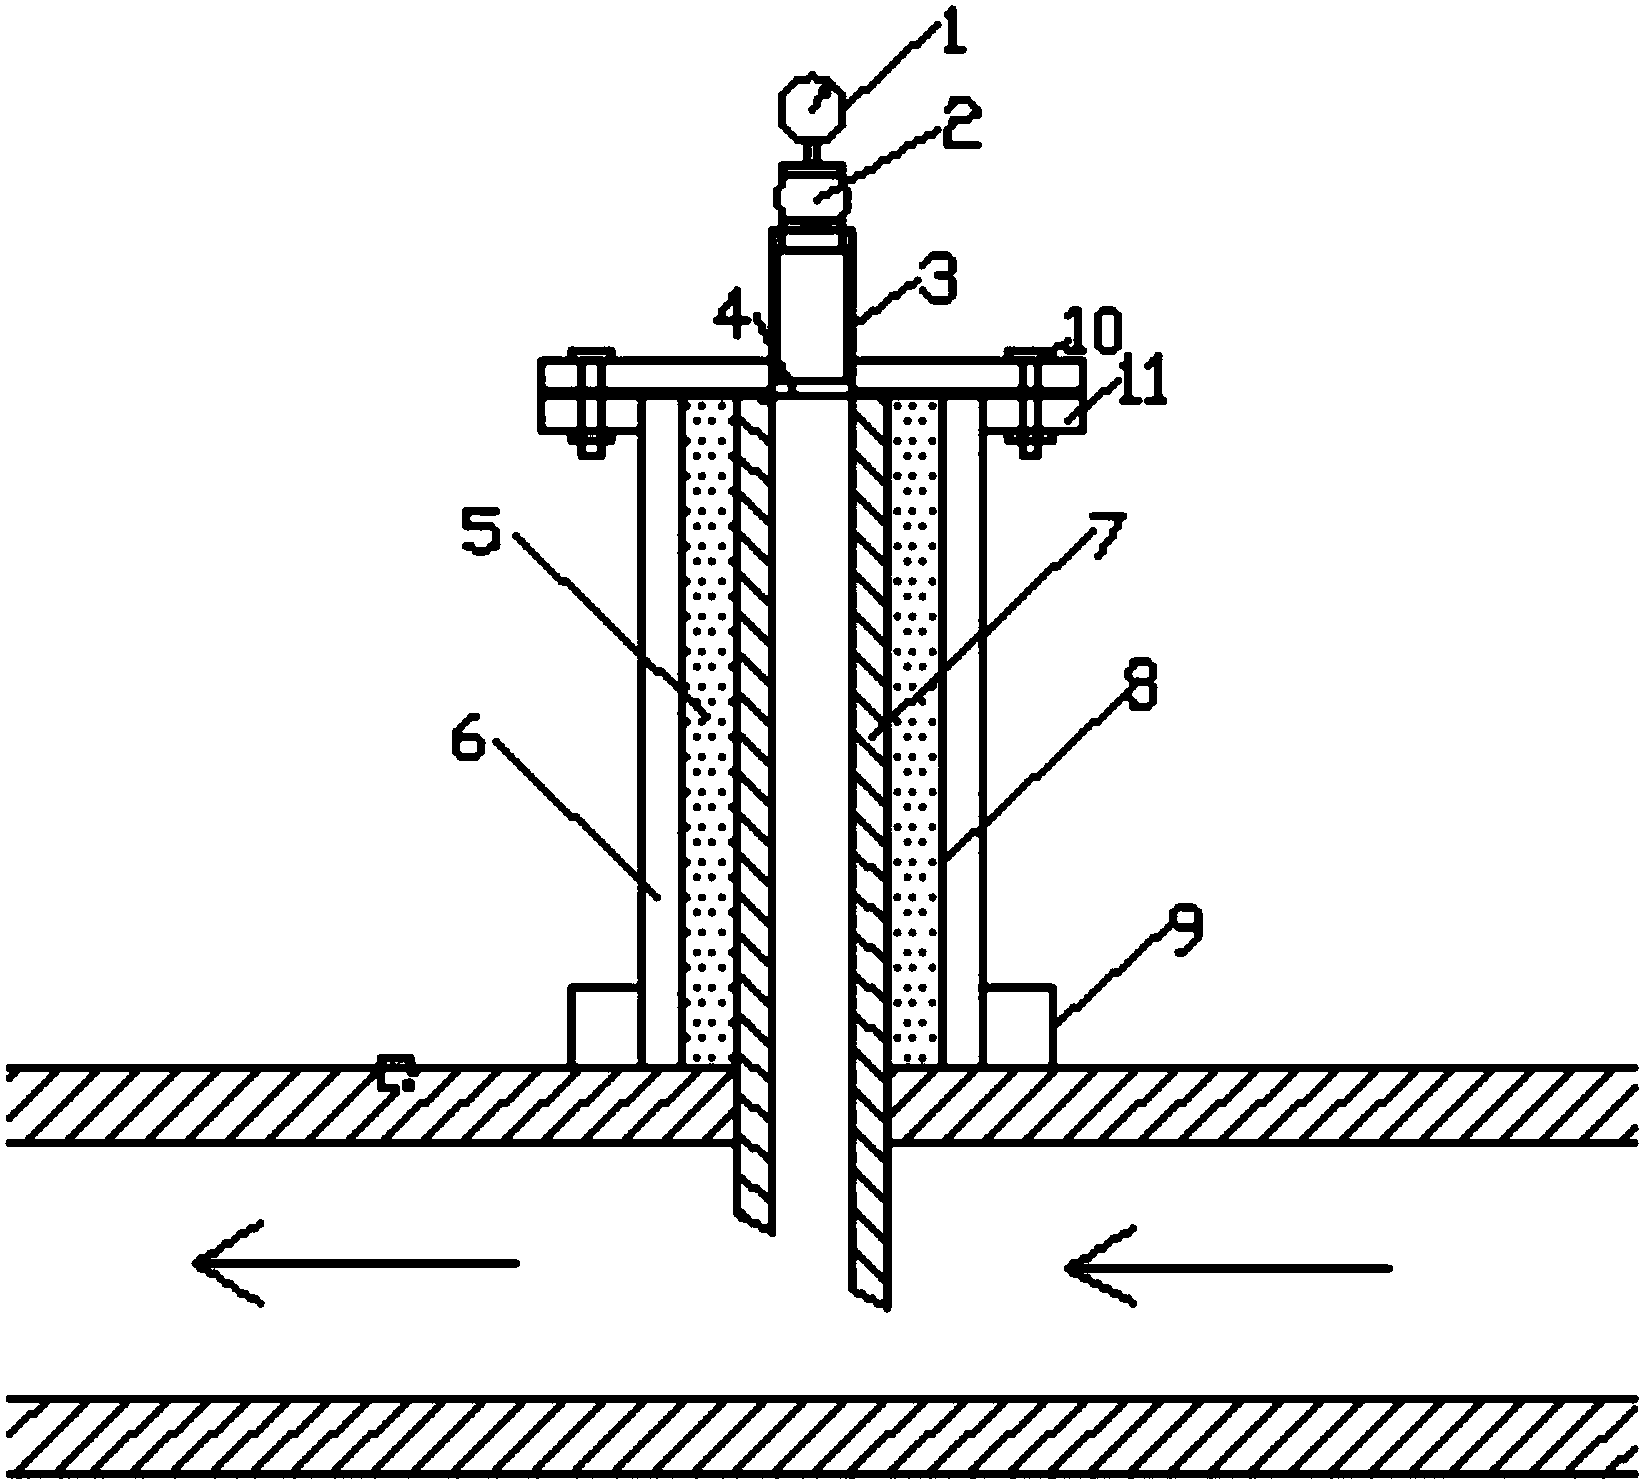 Anti-freezing pressure tapping pipe provided with heating pipe